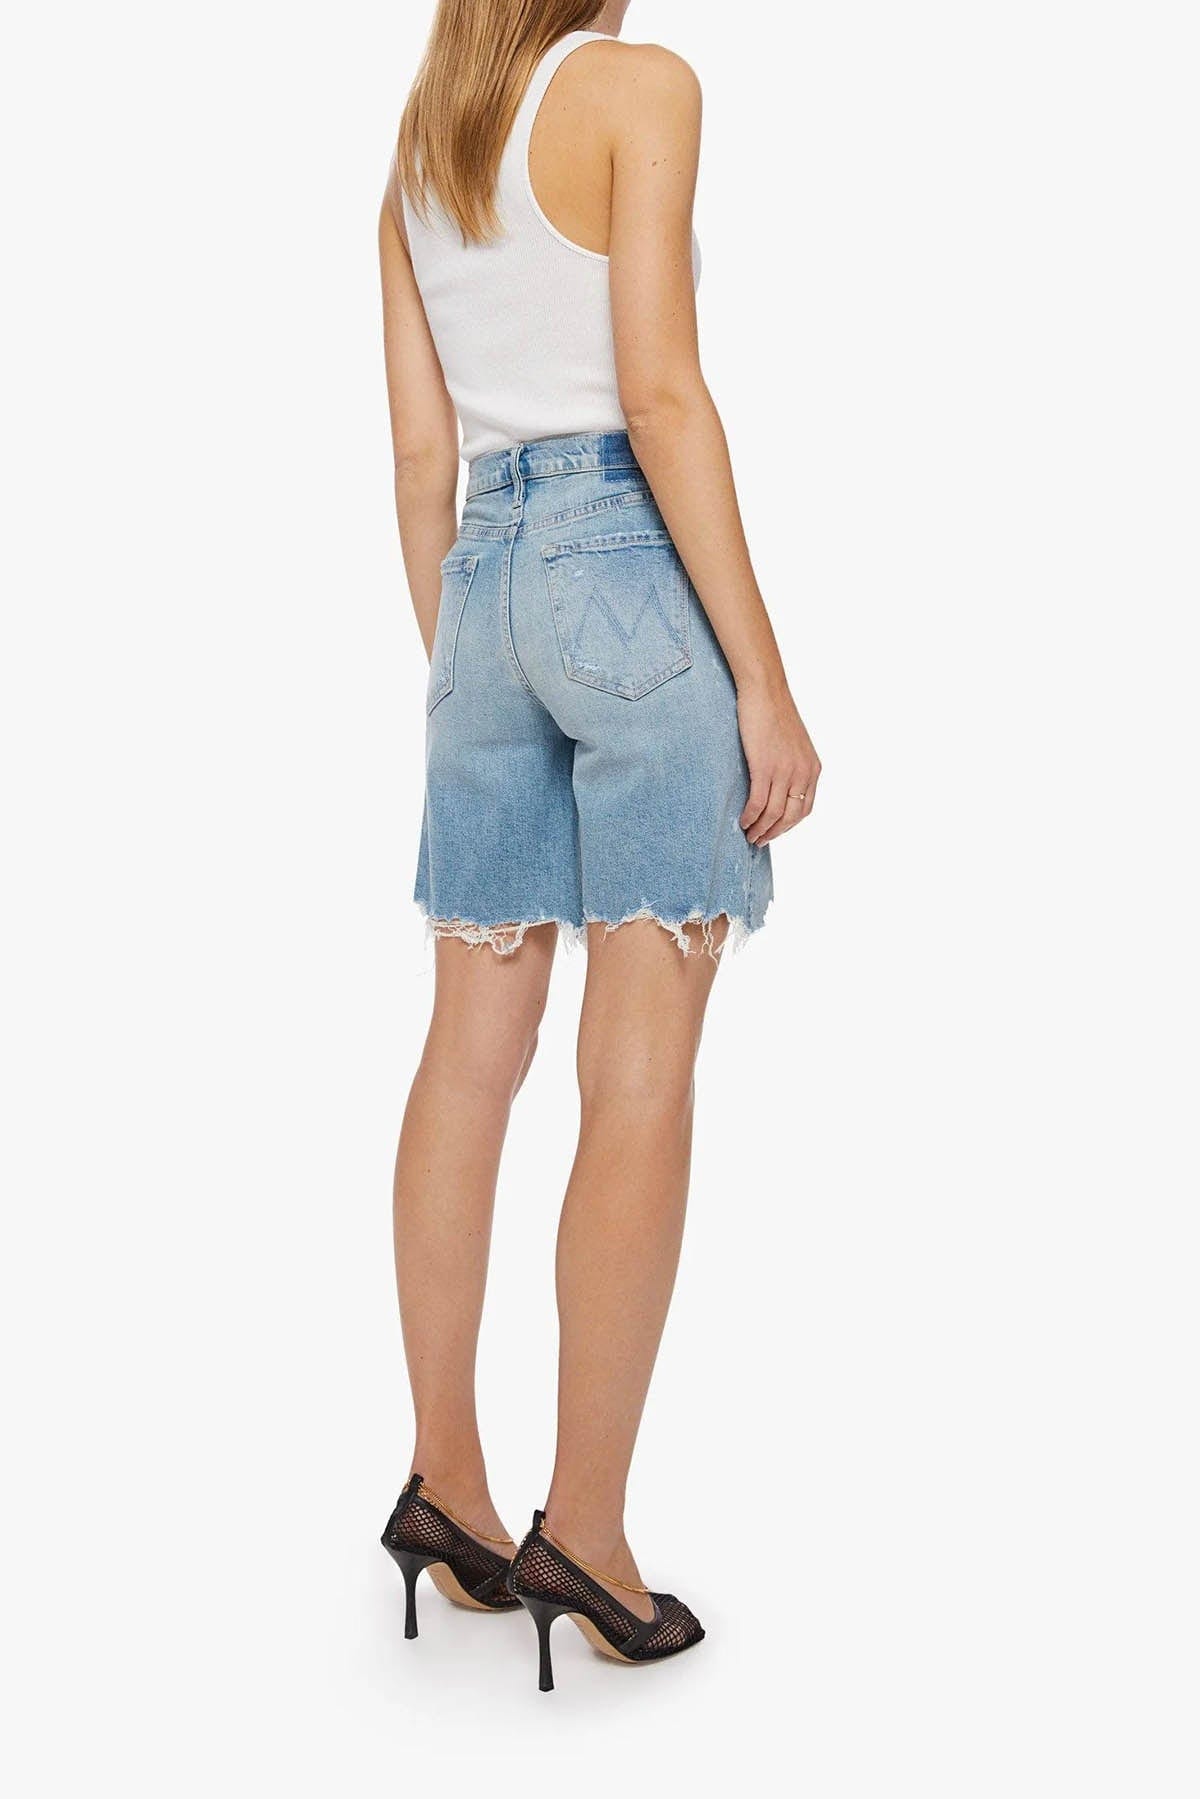 MOTHER PANTALONE IN DENIM  MATERIAL GIRL / 23 Down Low Undercover Short Fray